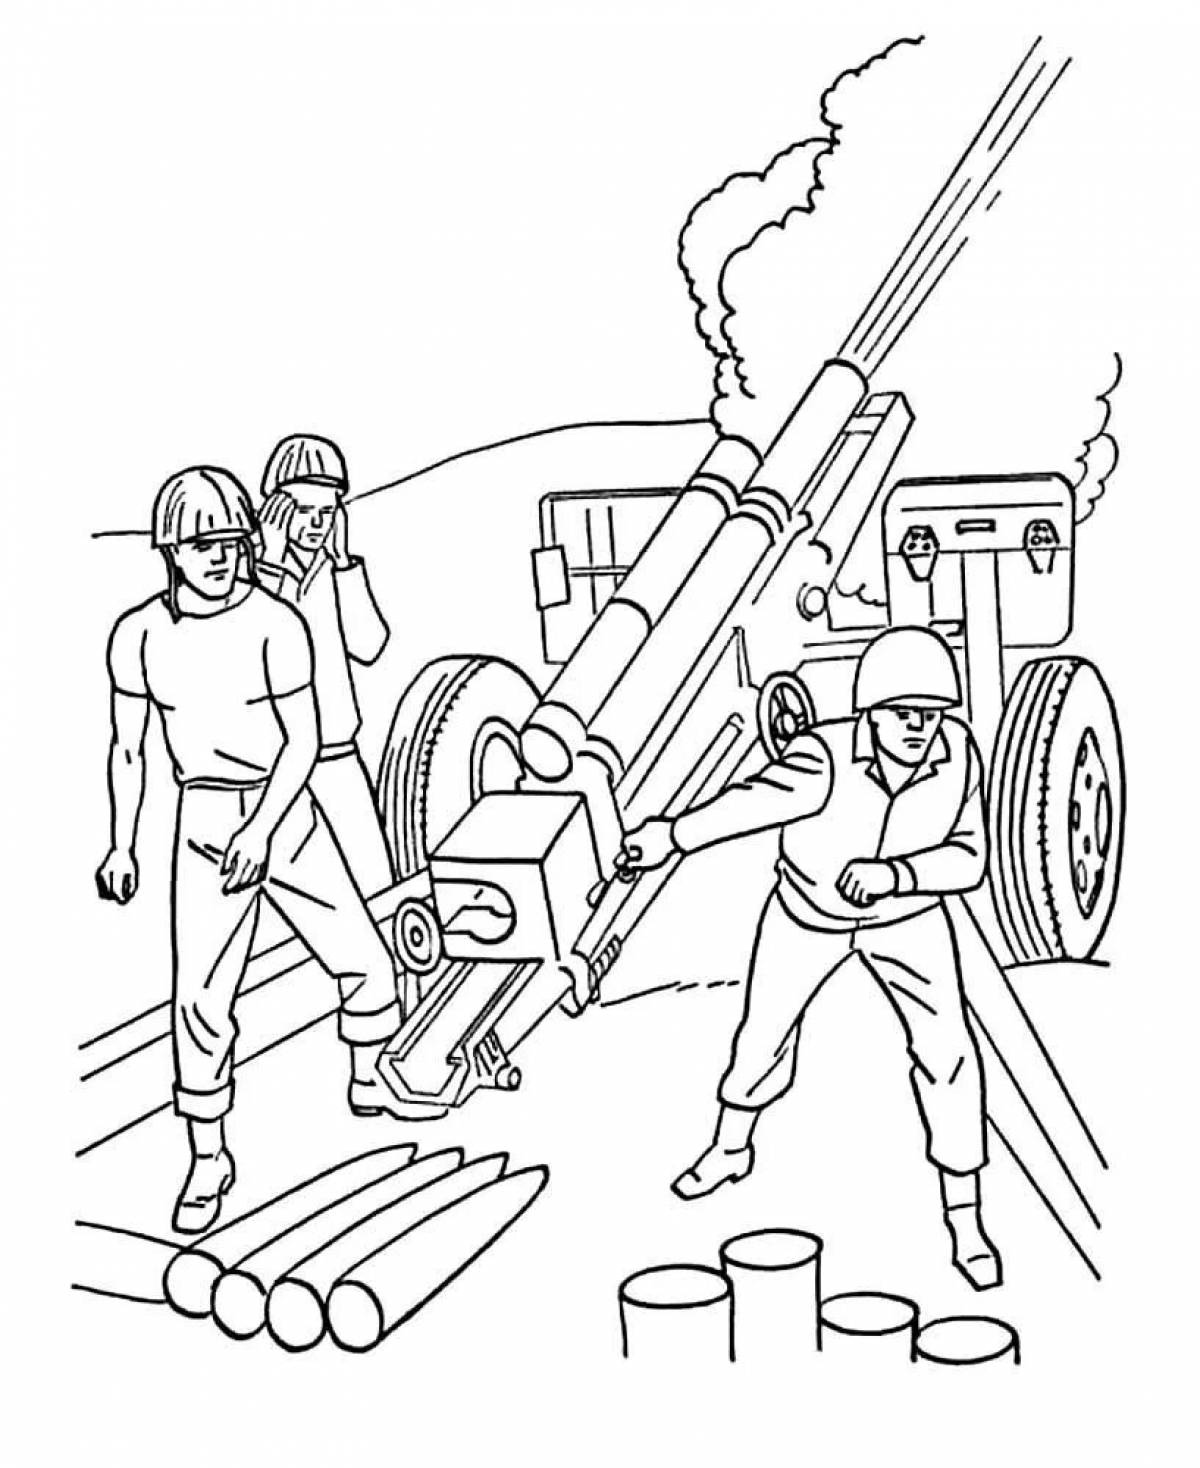 Coloring page shining soldiers of the Russian army